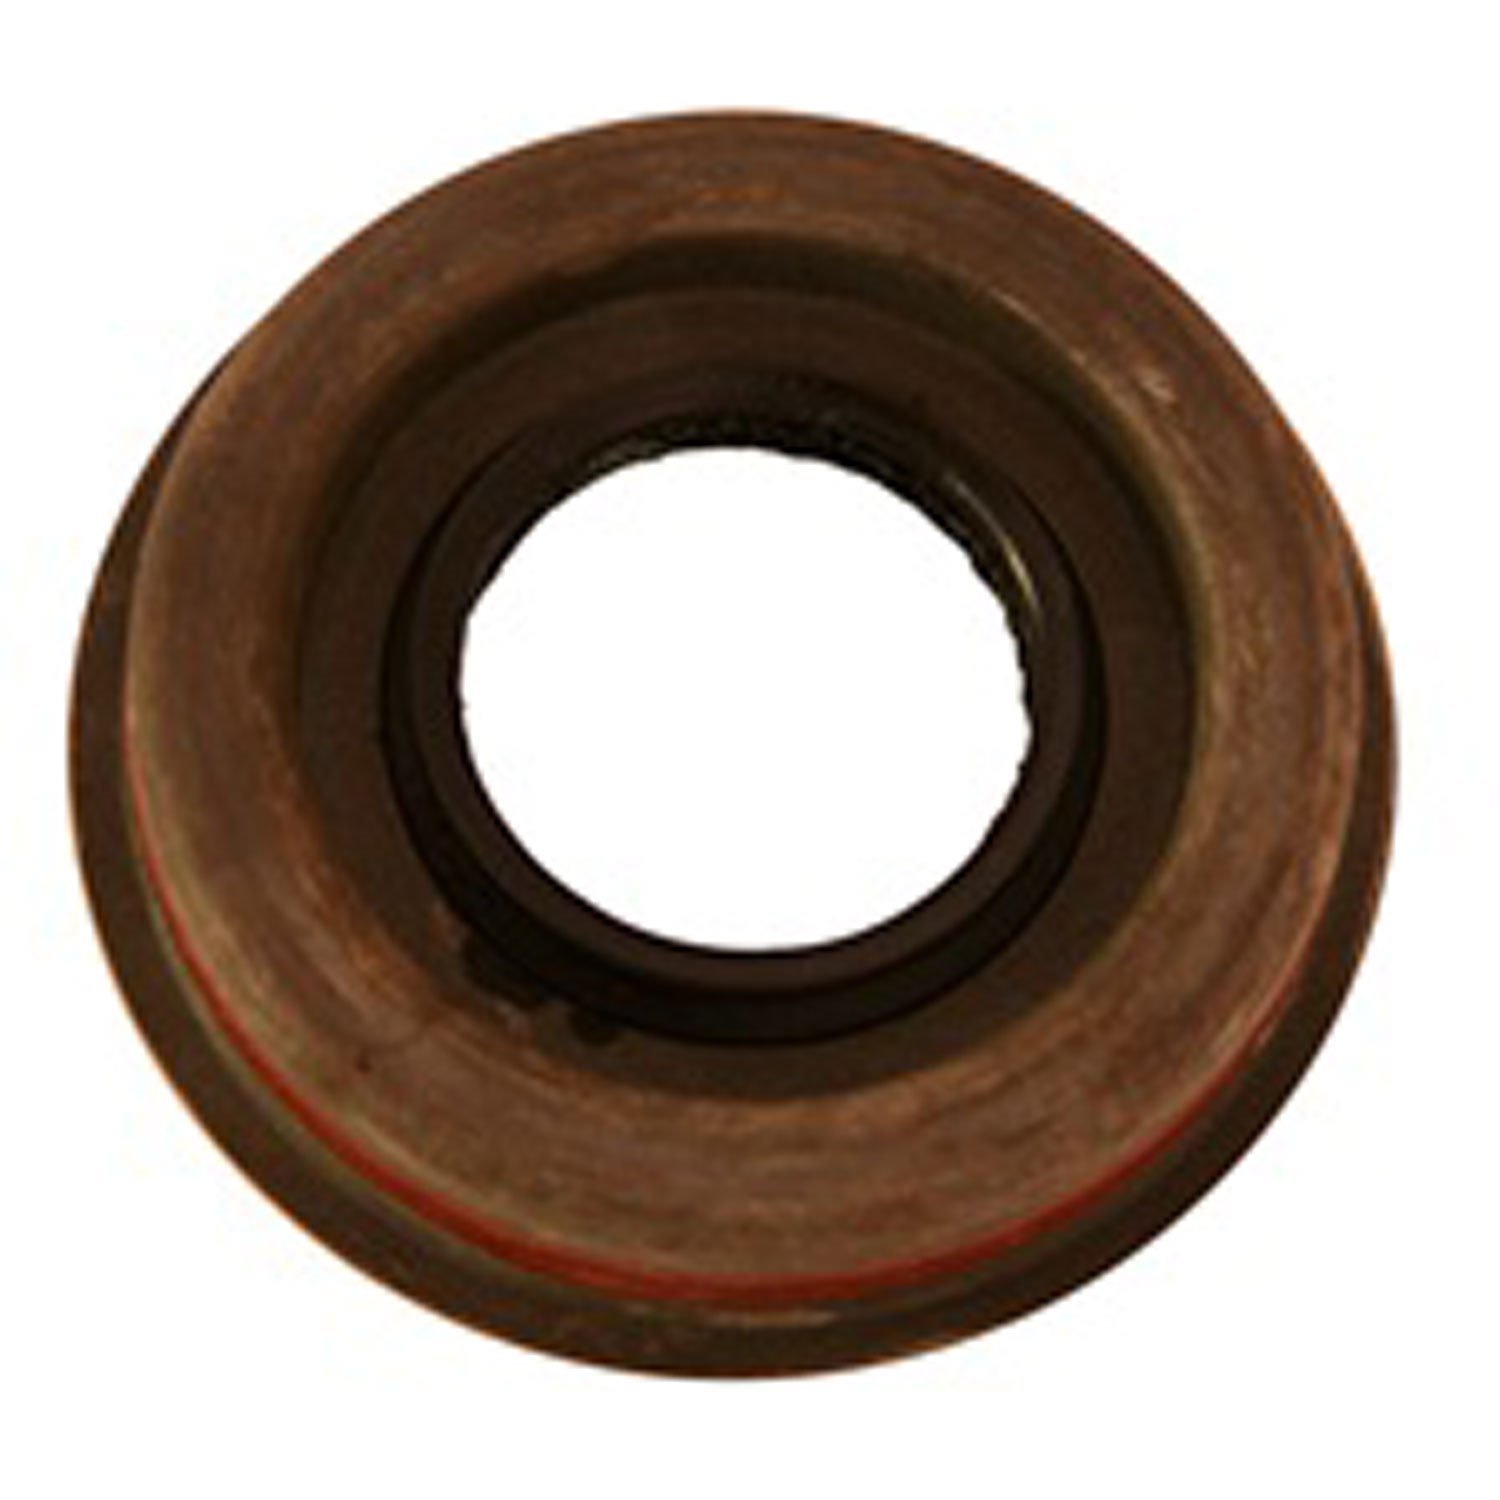 Inner Pinion Oil Seal 2001-2004 Grand Cherokee with Dana Super 30 2003-2006 Wrangler with Dana 44 Front